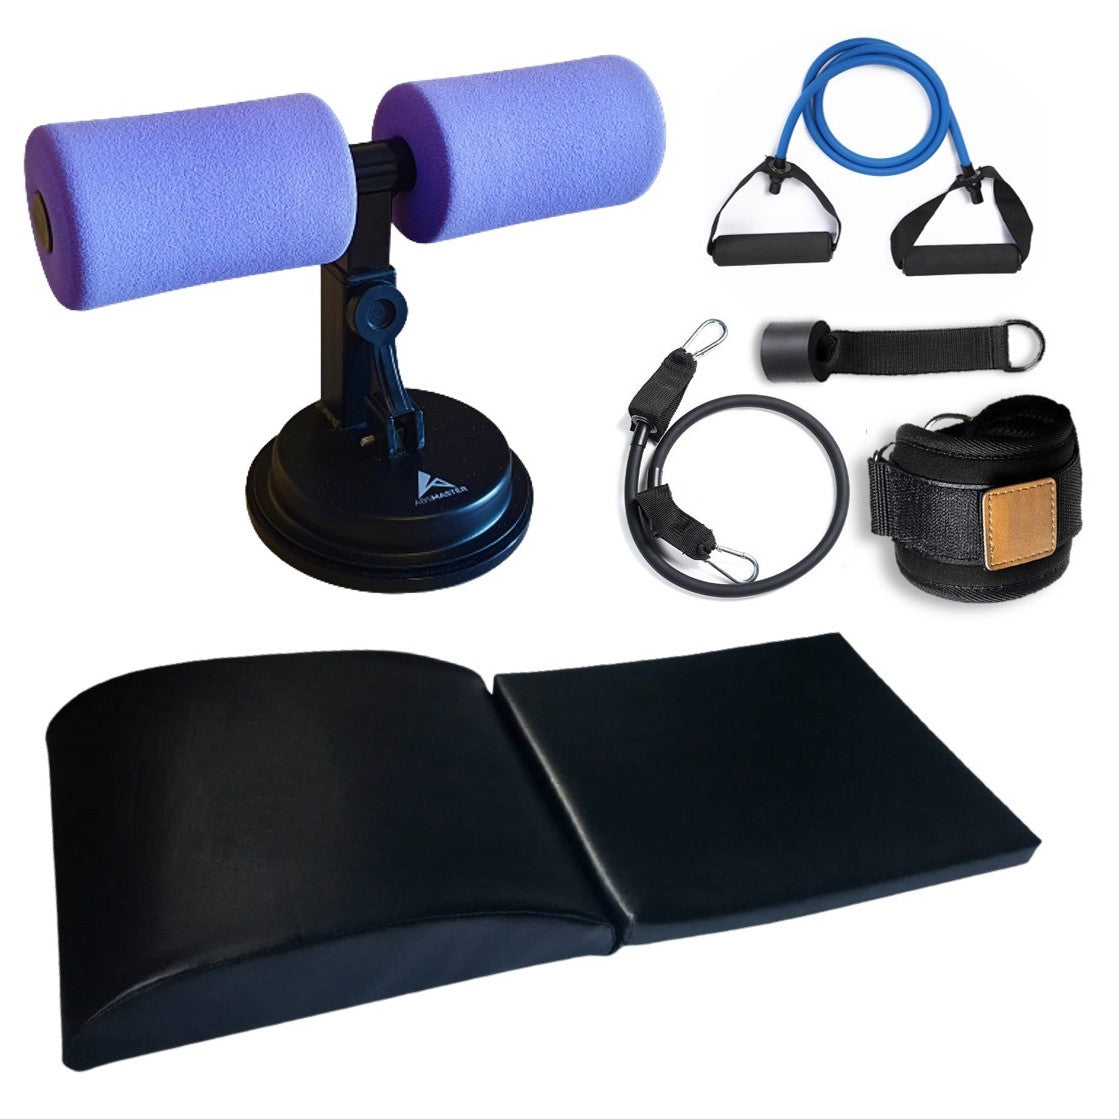 TOTAL ABS BUNDLE - AbsMaster Pro with Abs & Core Exercise Mat and Complete Resistance Bands Set